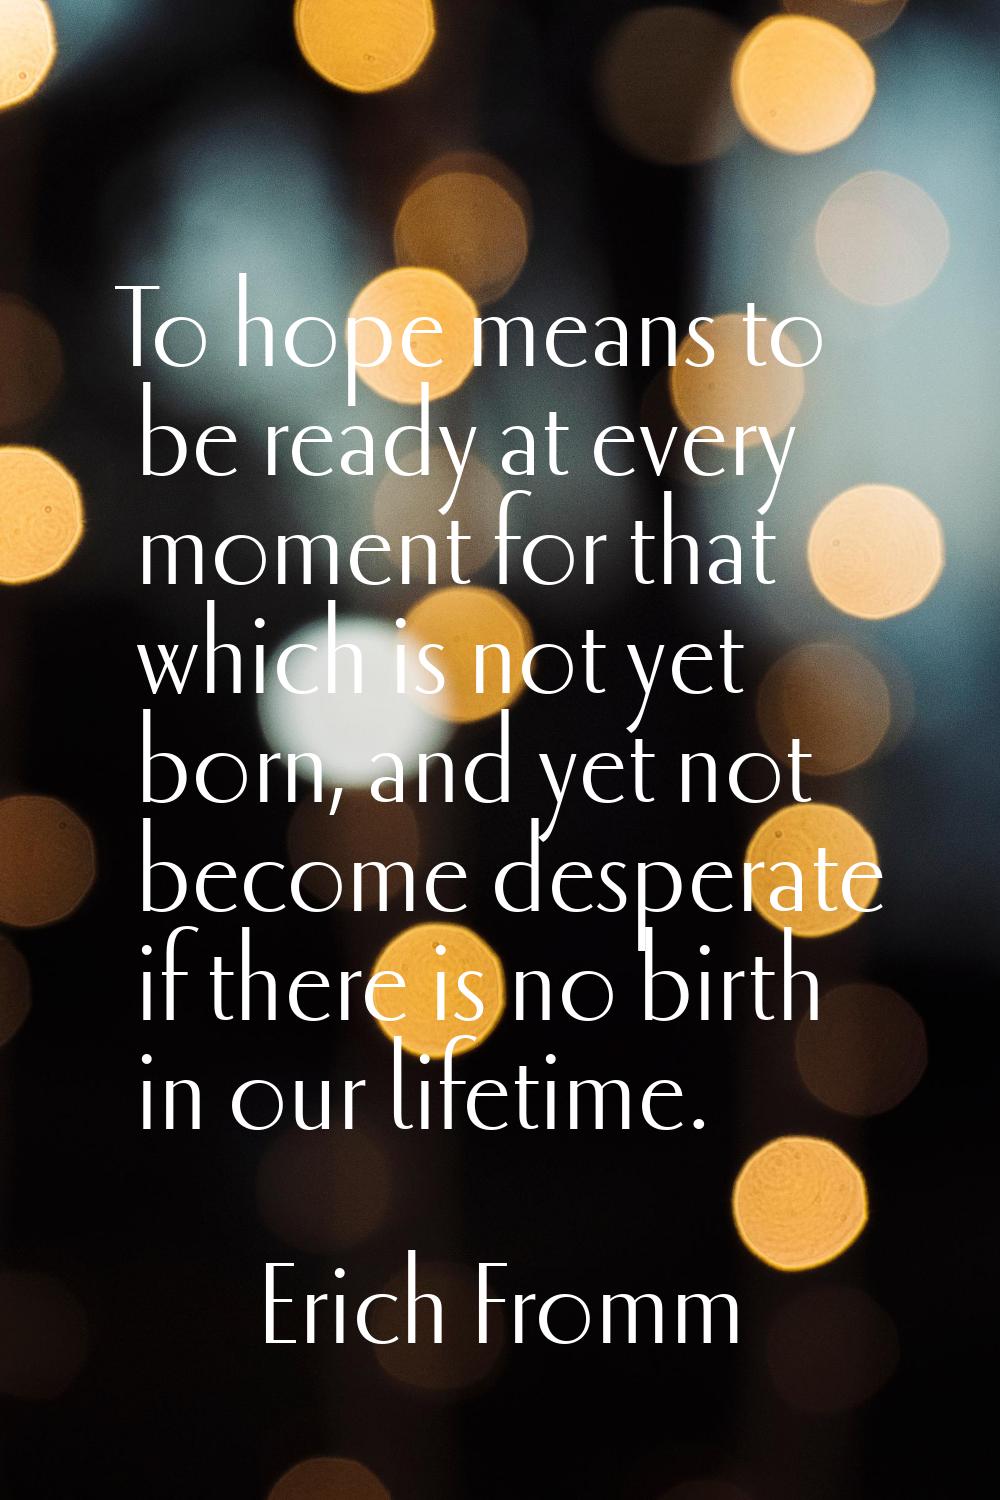 To hope means to be ready at every moment for that which is not yet born, and yet not become desper